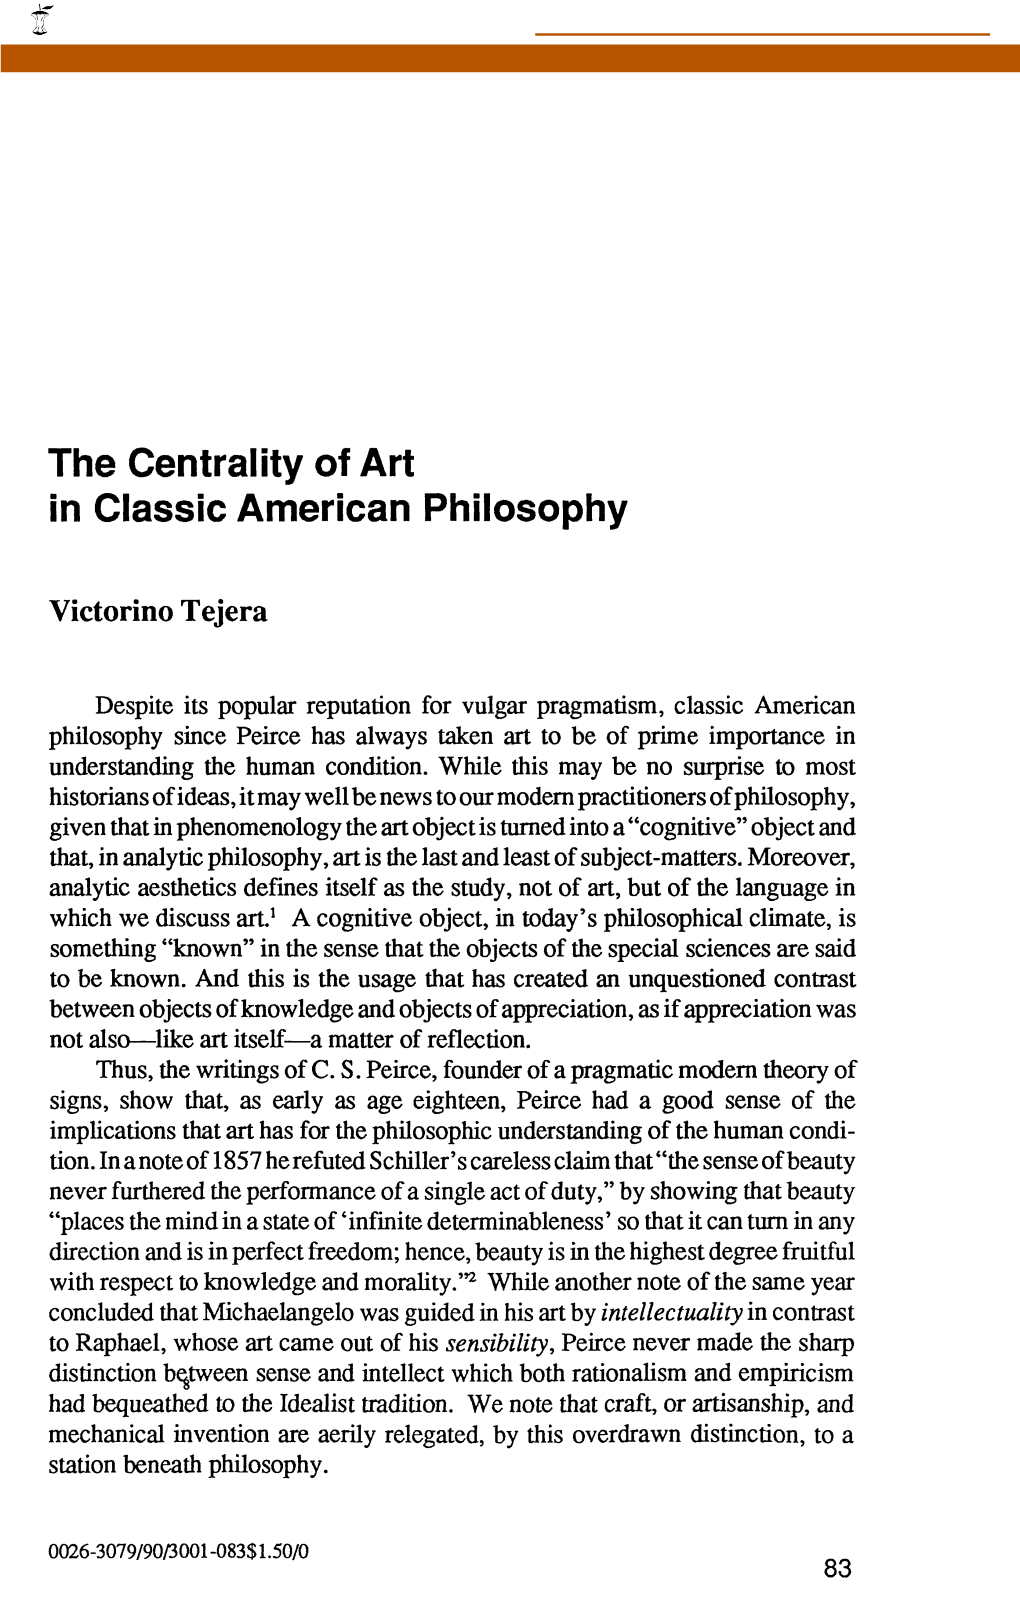 The Central Ity of Art in Classic American Philosophy